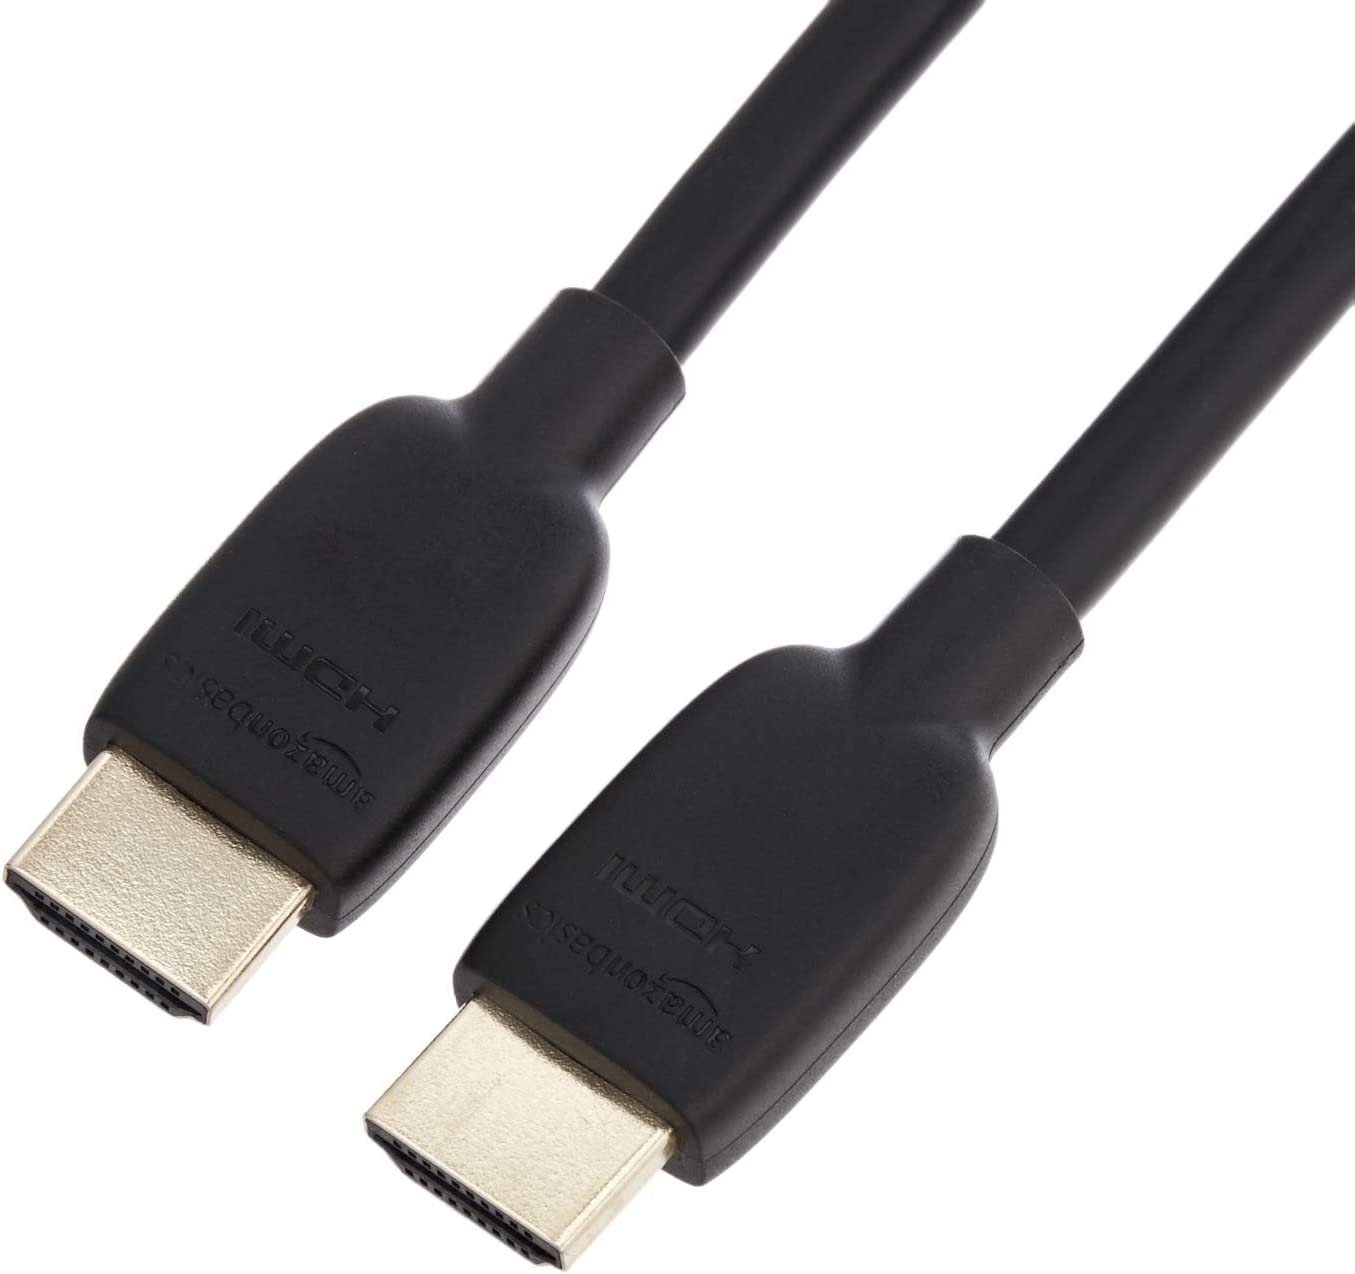 Prime Exclusive Deal: Amazon Basics High-Speed HDMI Cable (48Gbps, 8K/60Hz ) - 10 Feet, Black $5.9